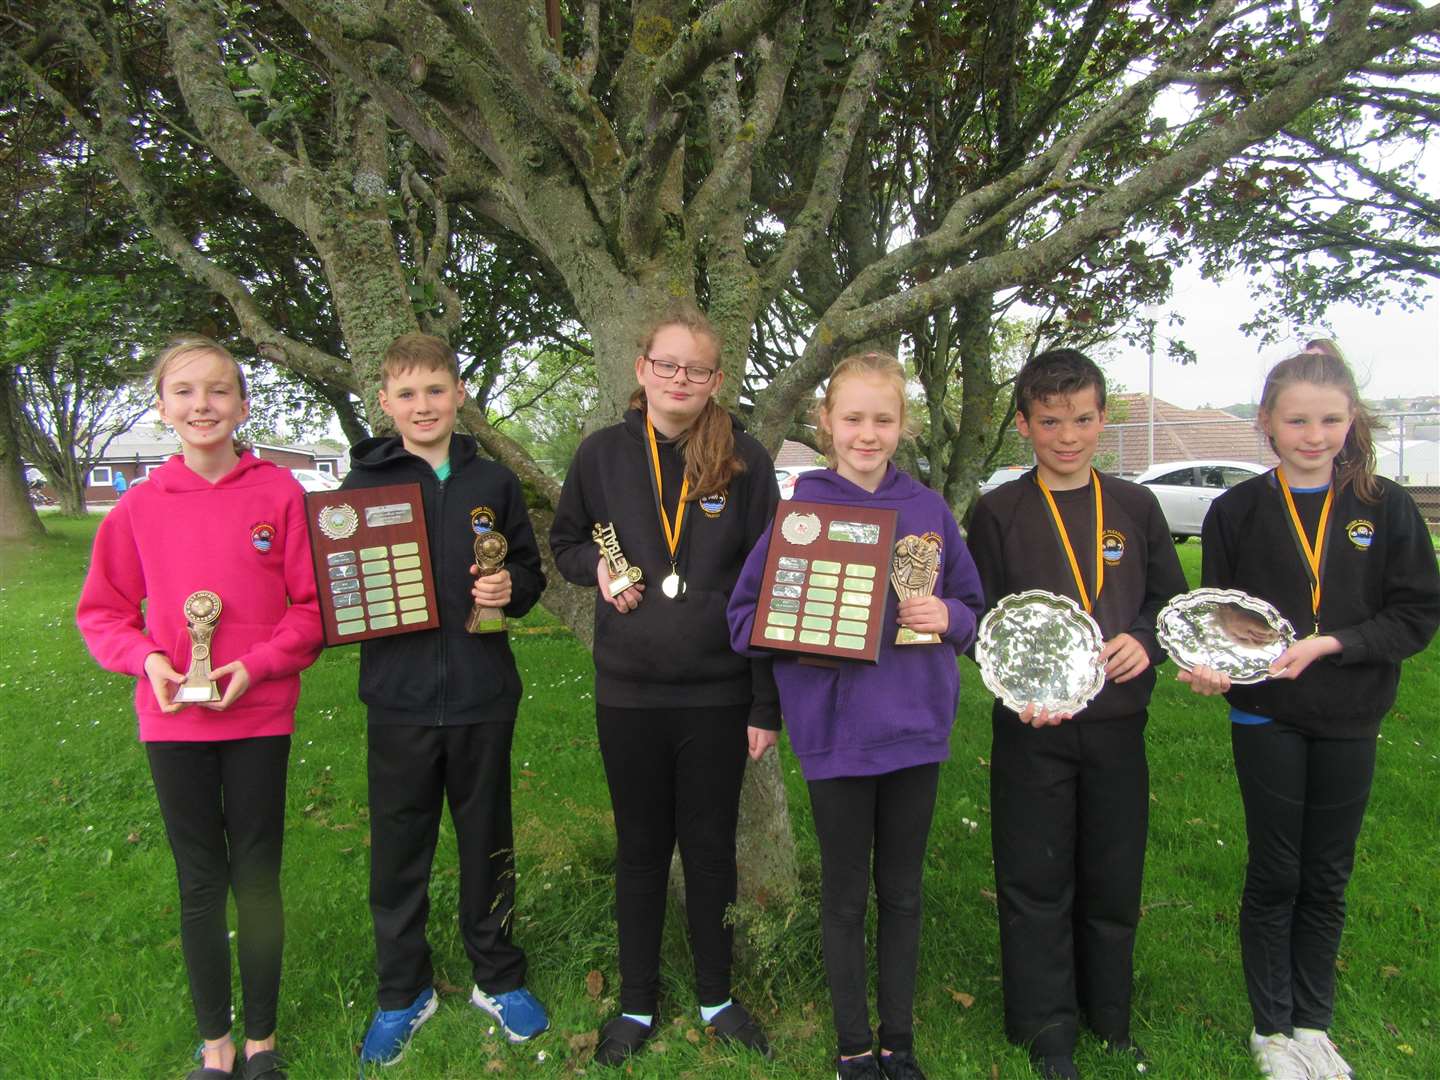 From left: Geena Hossack – most improved, football; Bruin Gunn – player of the year, football; Chloe Duffy – most improved, netball; Isla Mackay – player of the year, netball; Tom Armitage – boys’ sports champion; Kelsey Norquoy – girls’ sports champion.